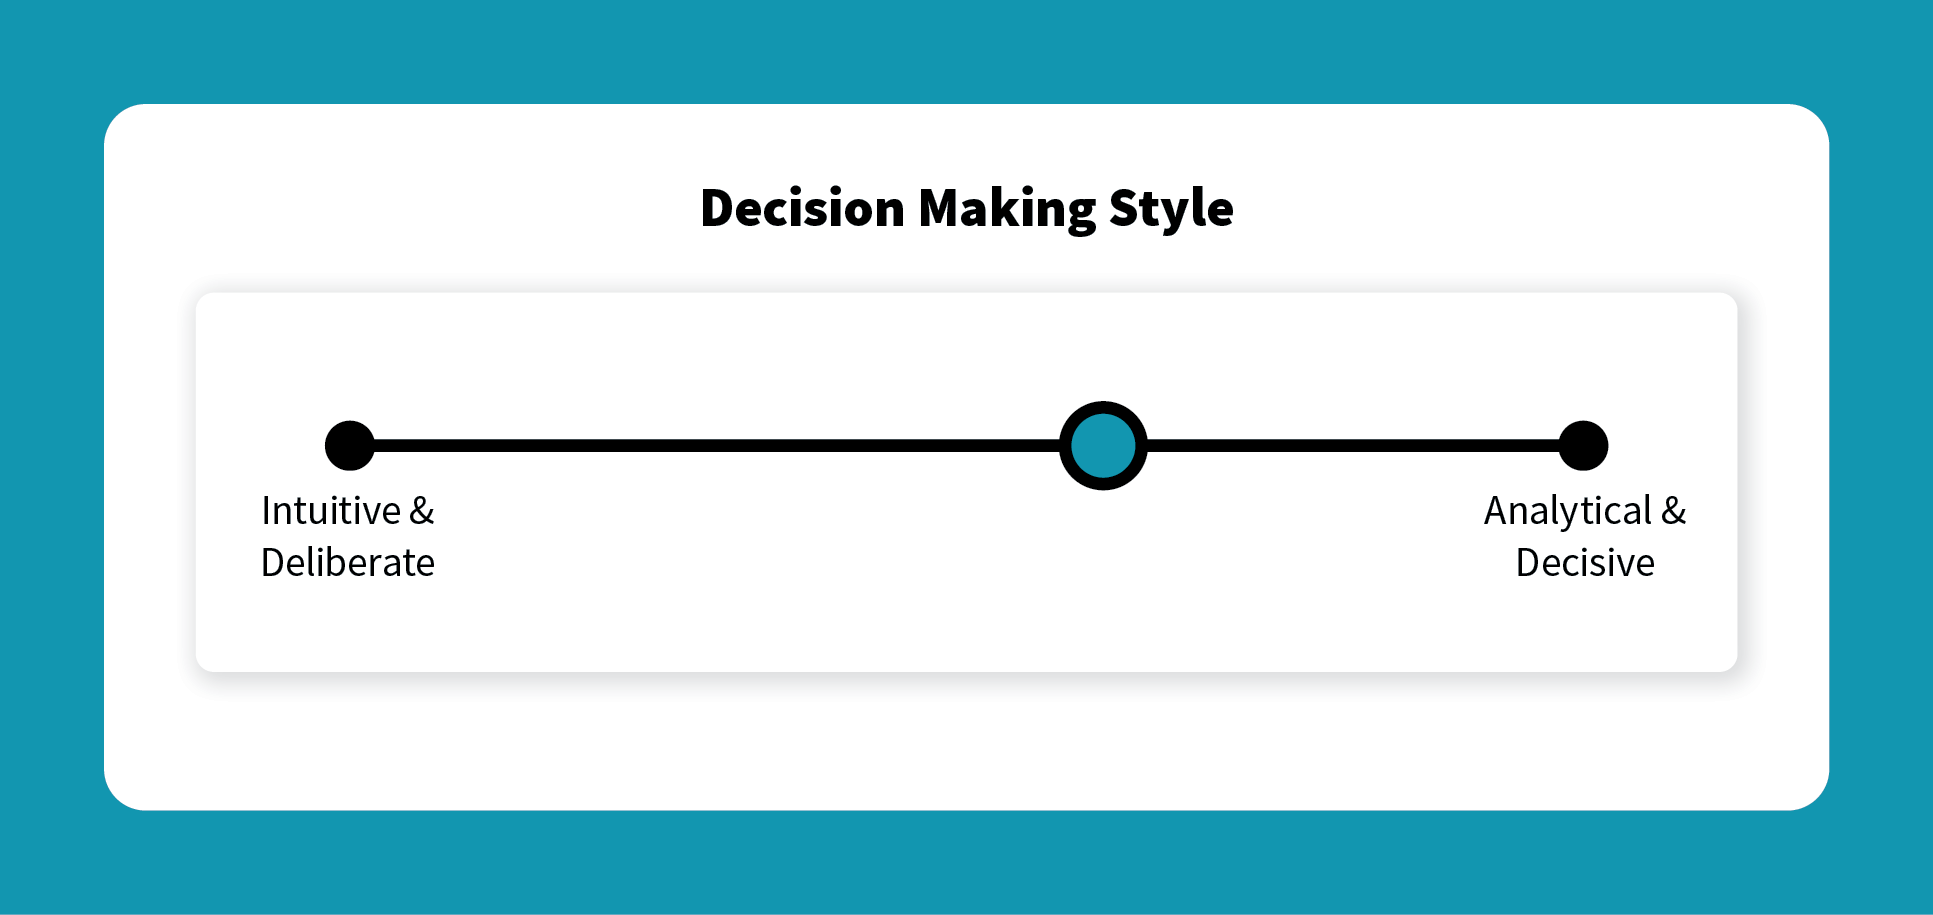 a black and blue line graph showing decision making styles